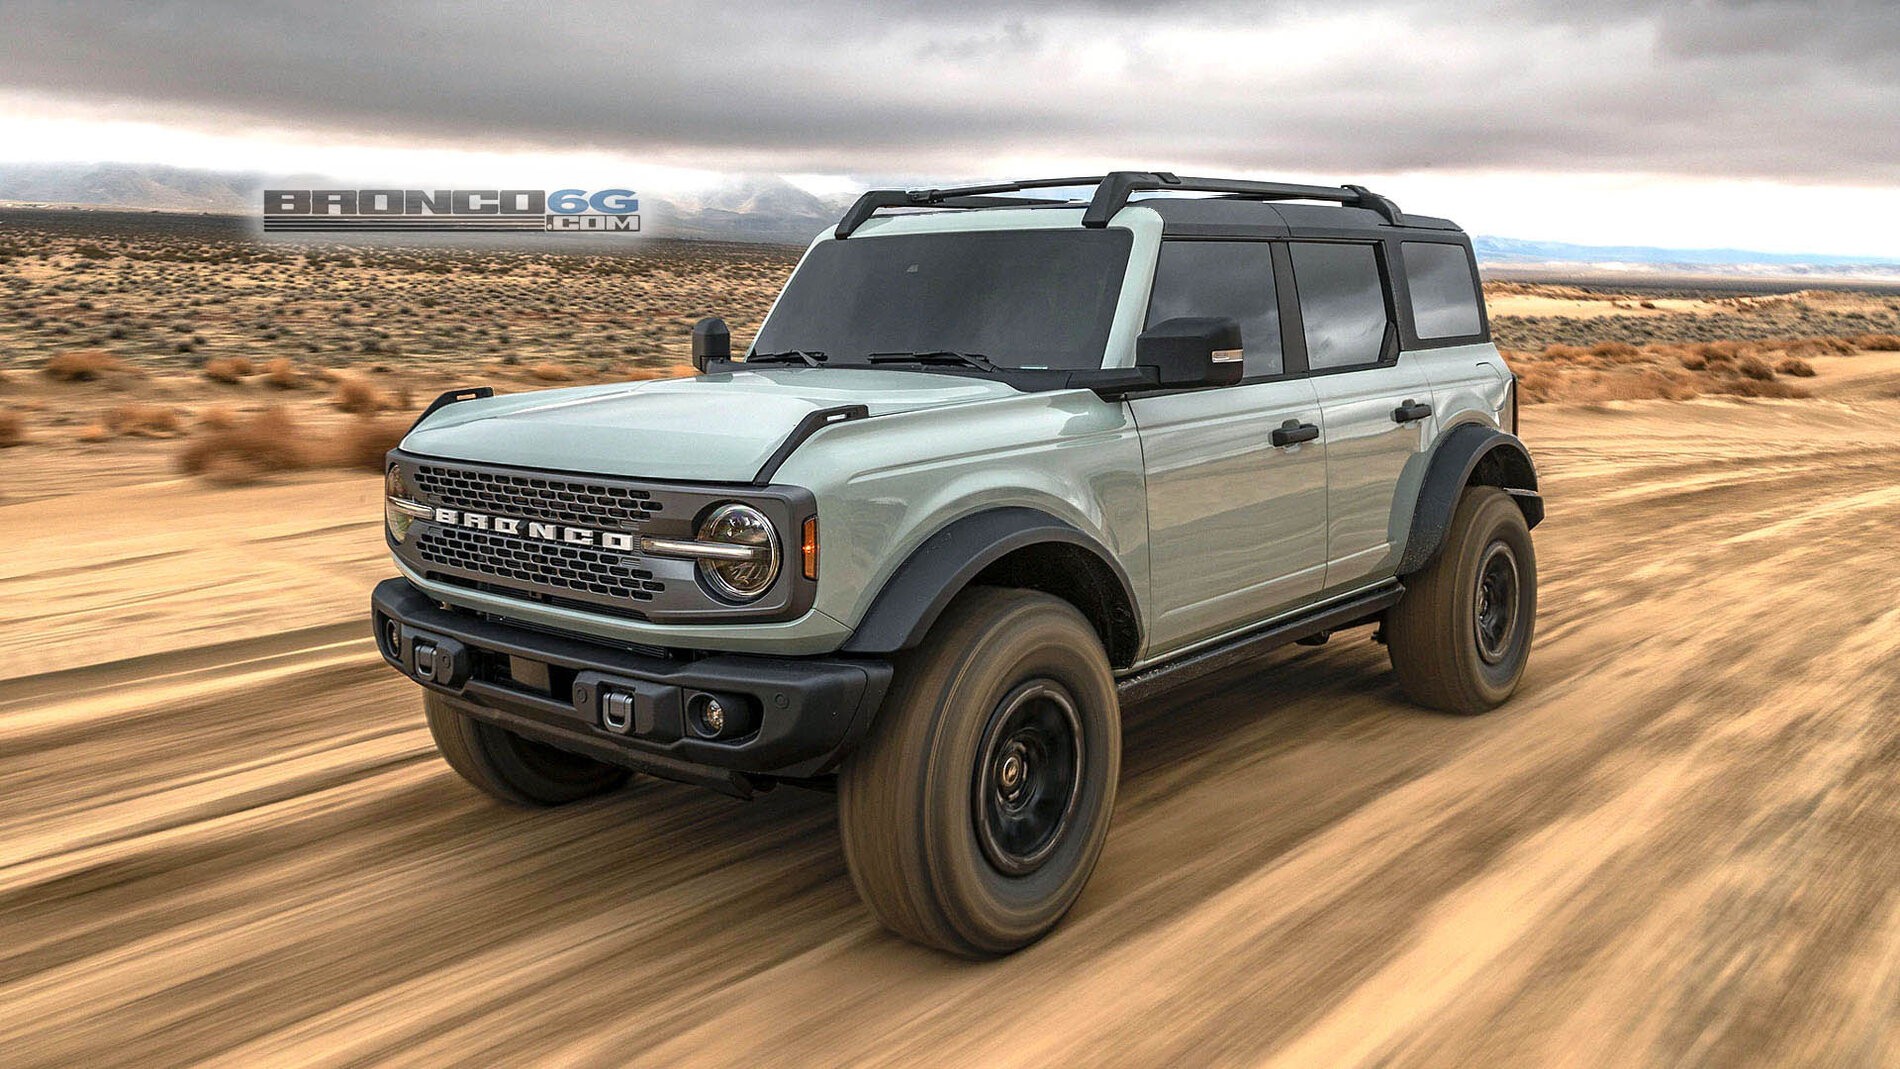 See The 2021 Ford Bronco Sasquatch In All Colors Proudly Wearing White Fenders 5 